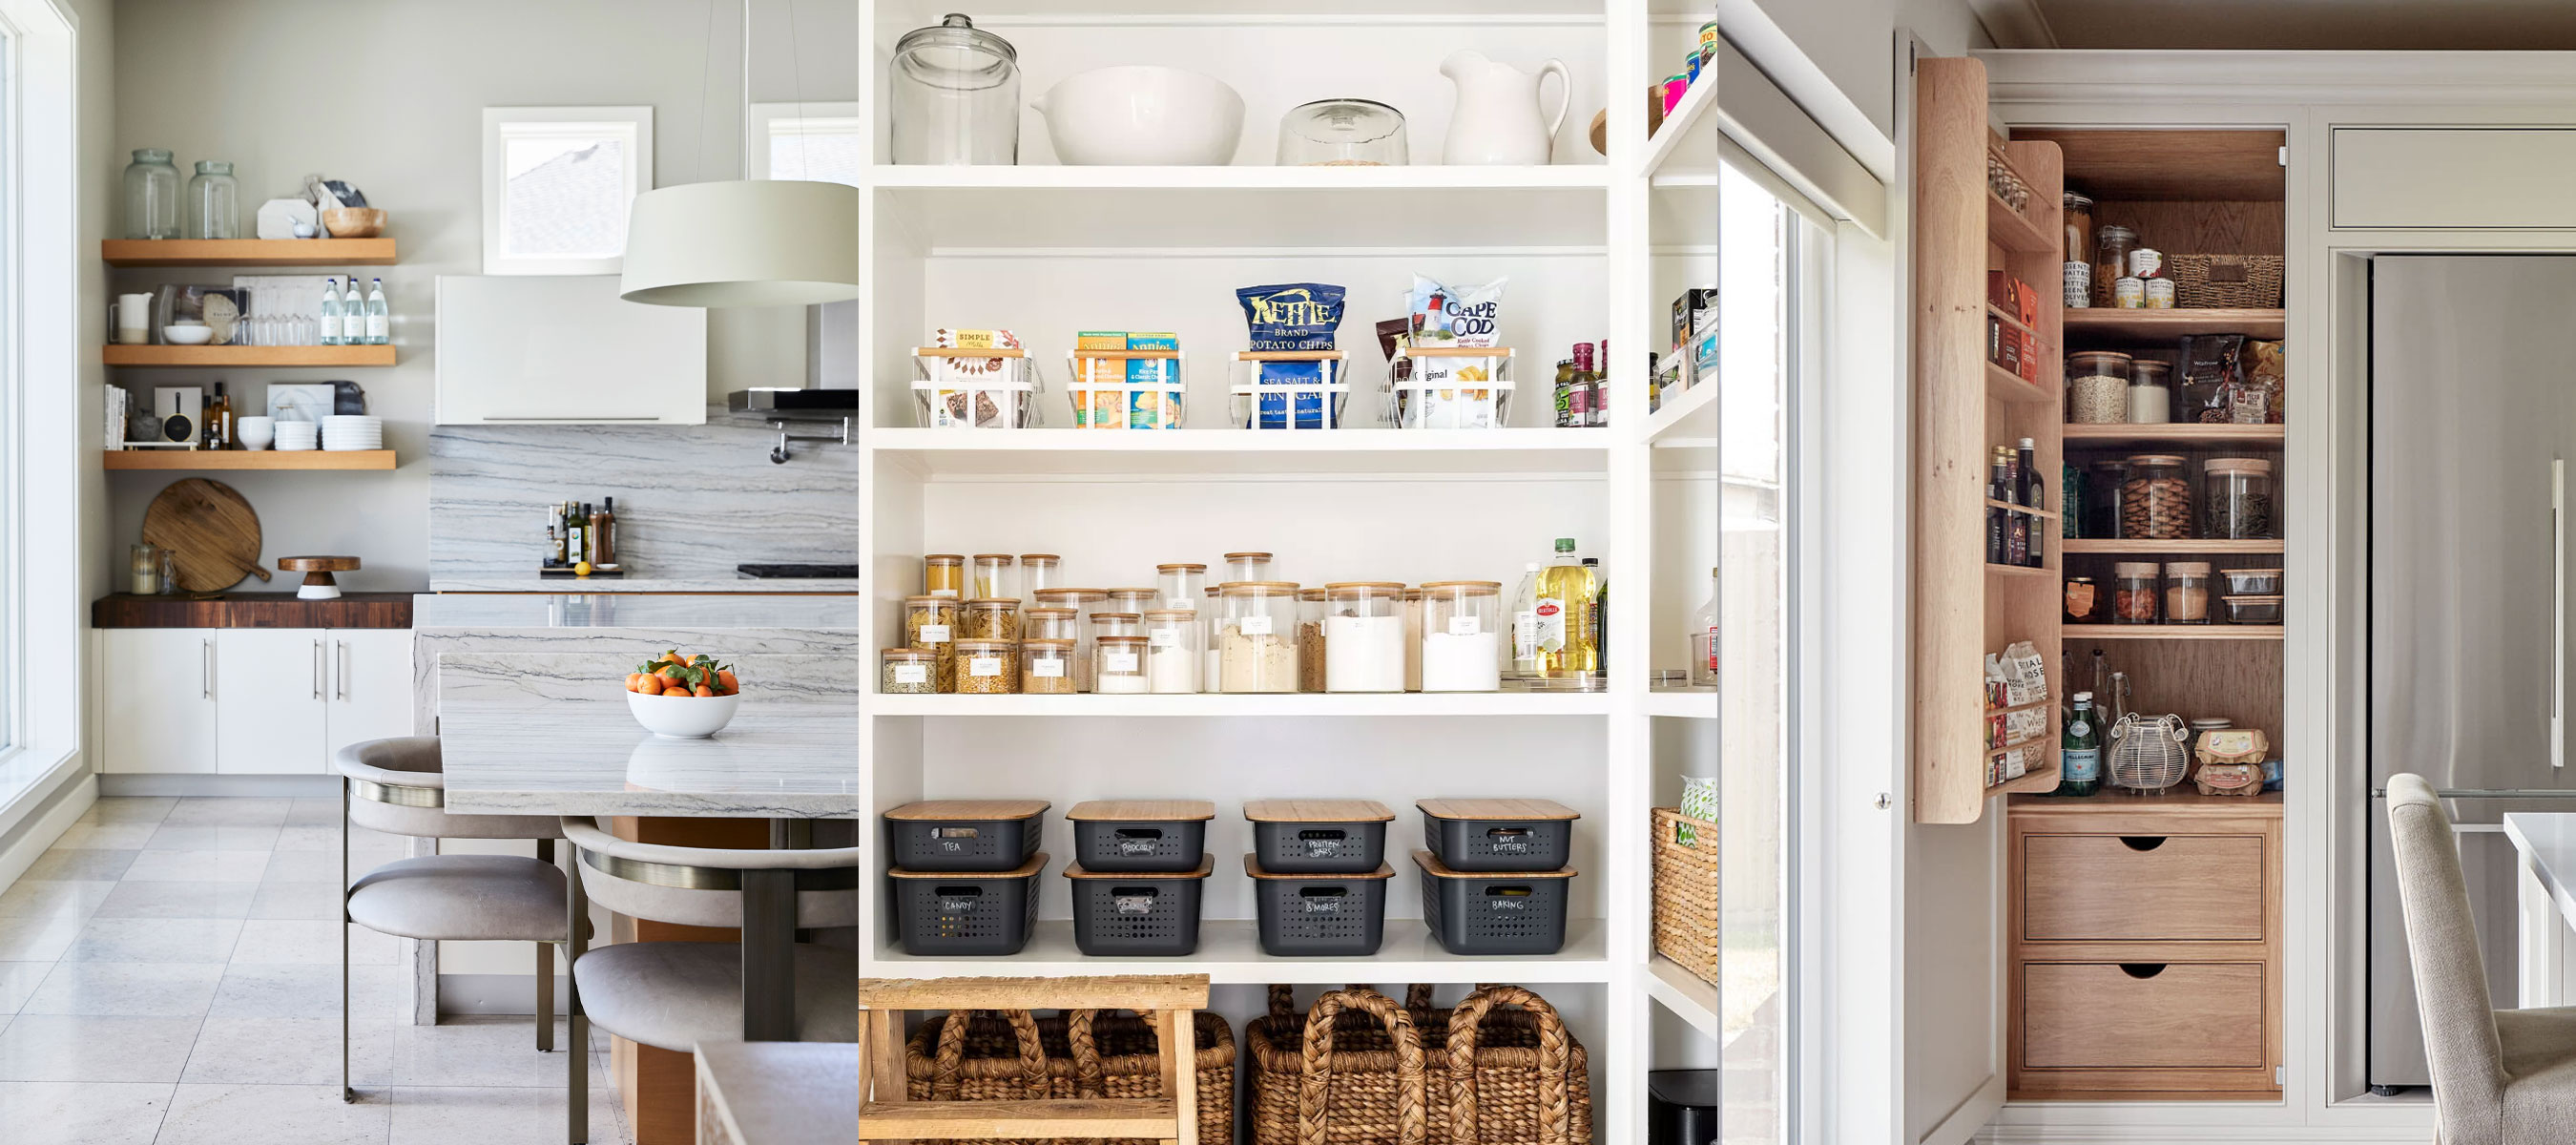 Pantry design ideas: 7 ways to elevate your kitchen space